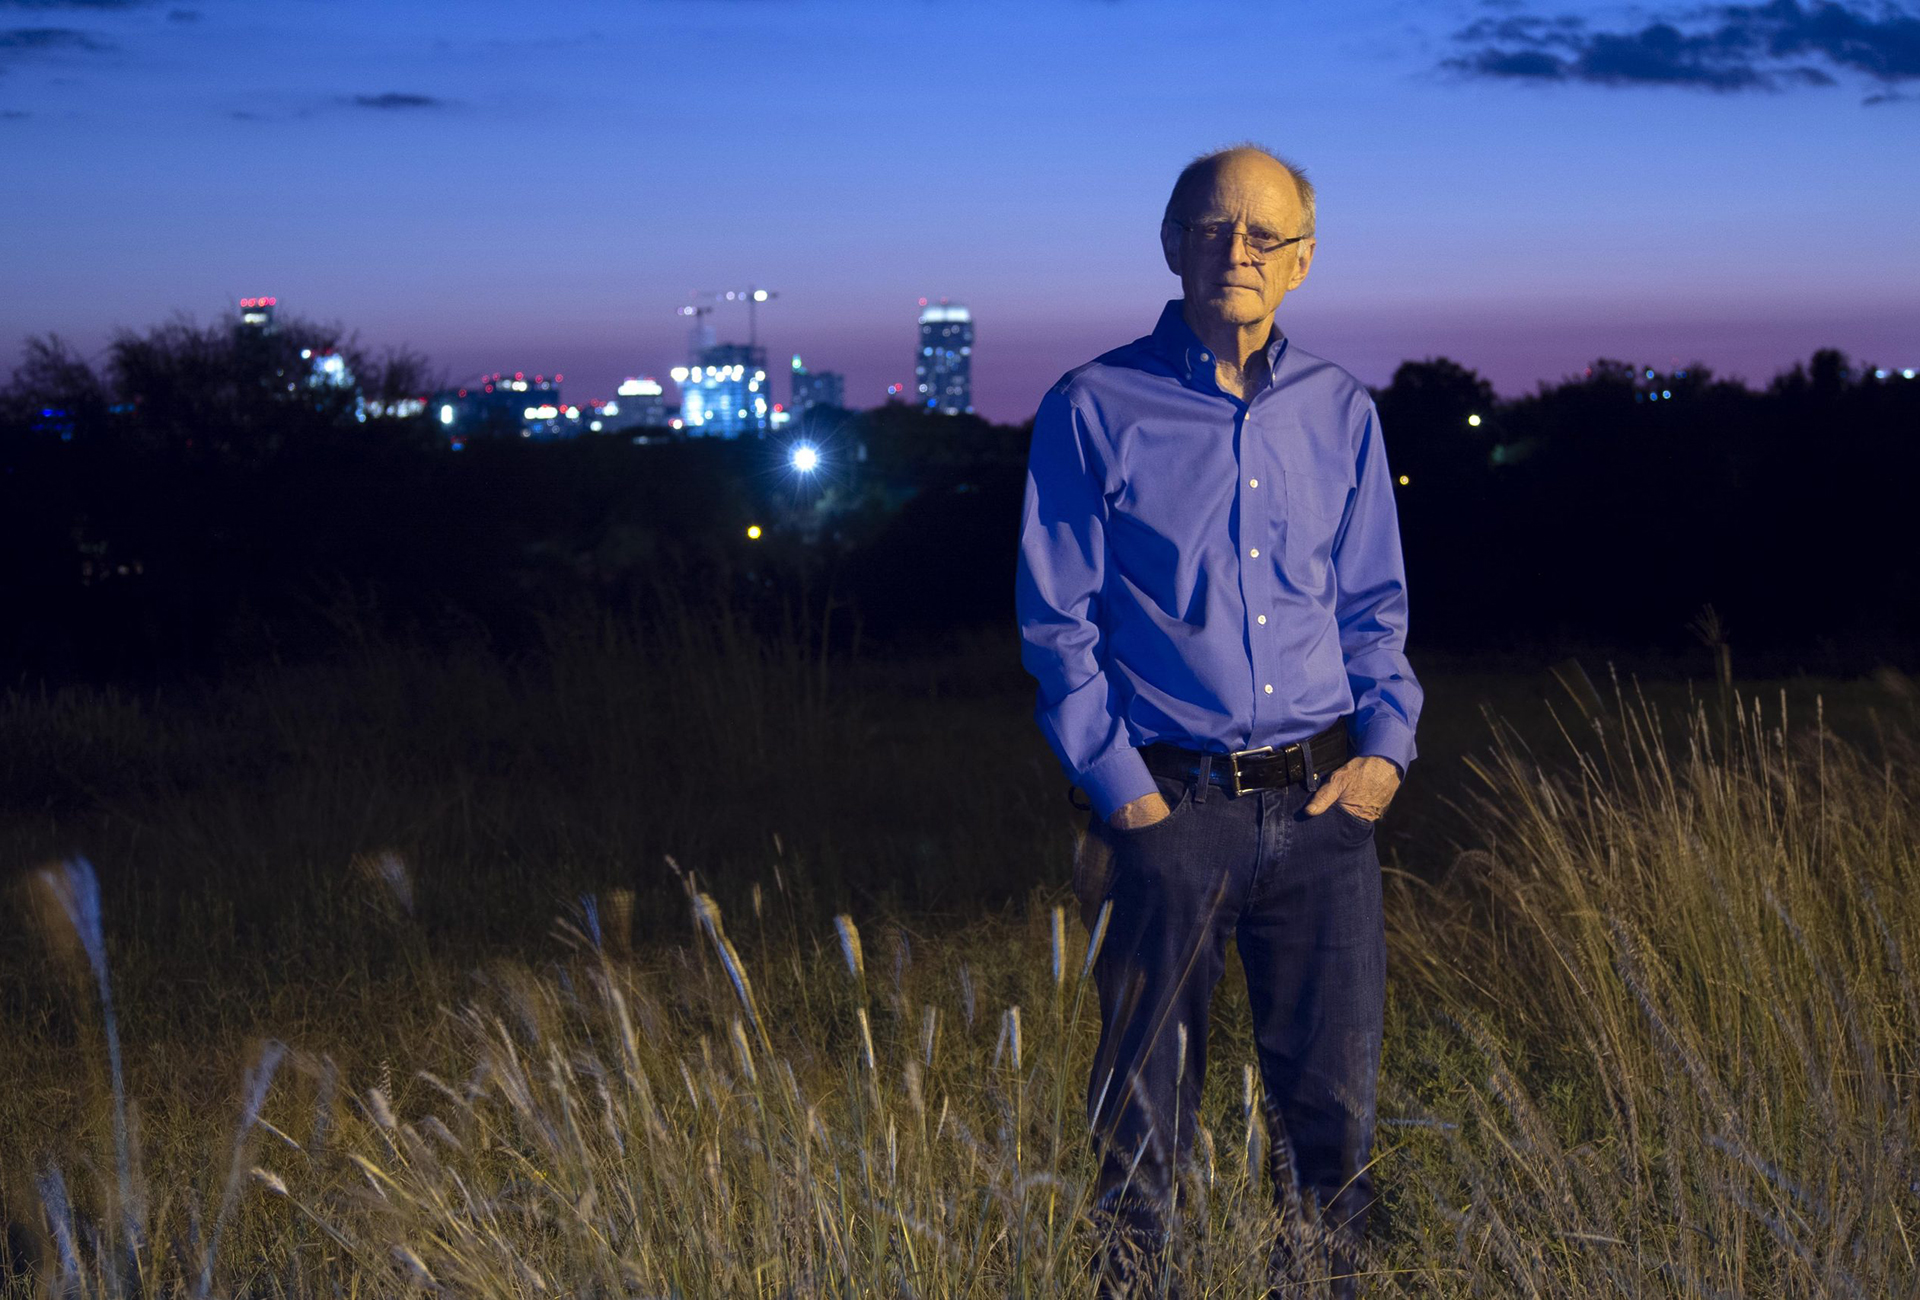 Jamie Pennebaker stands in a field at sunset with cityscape in background.